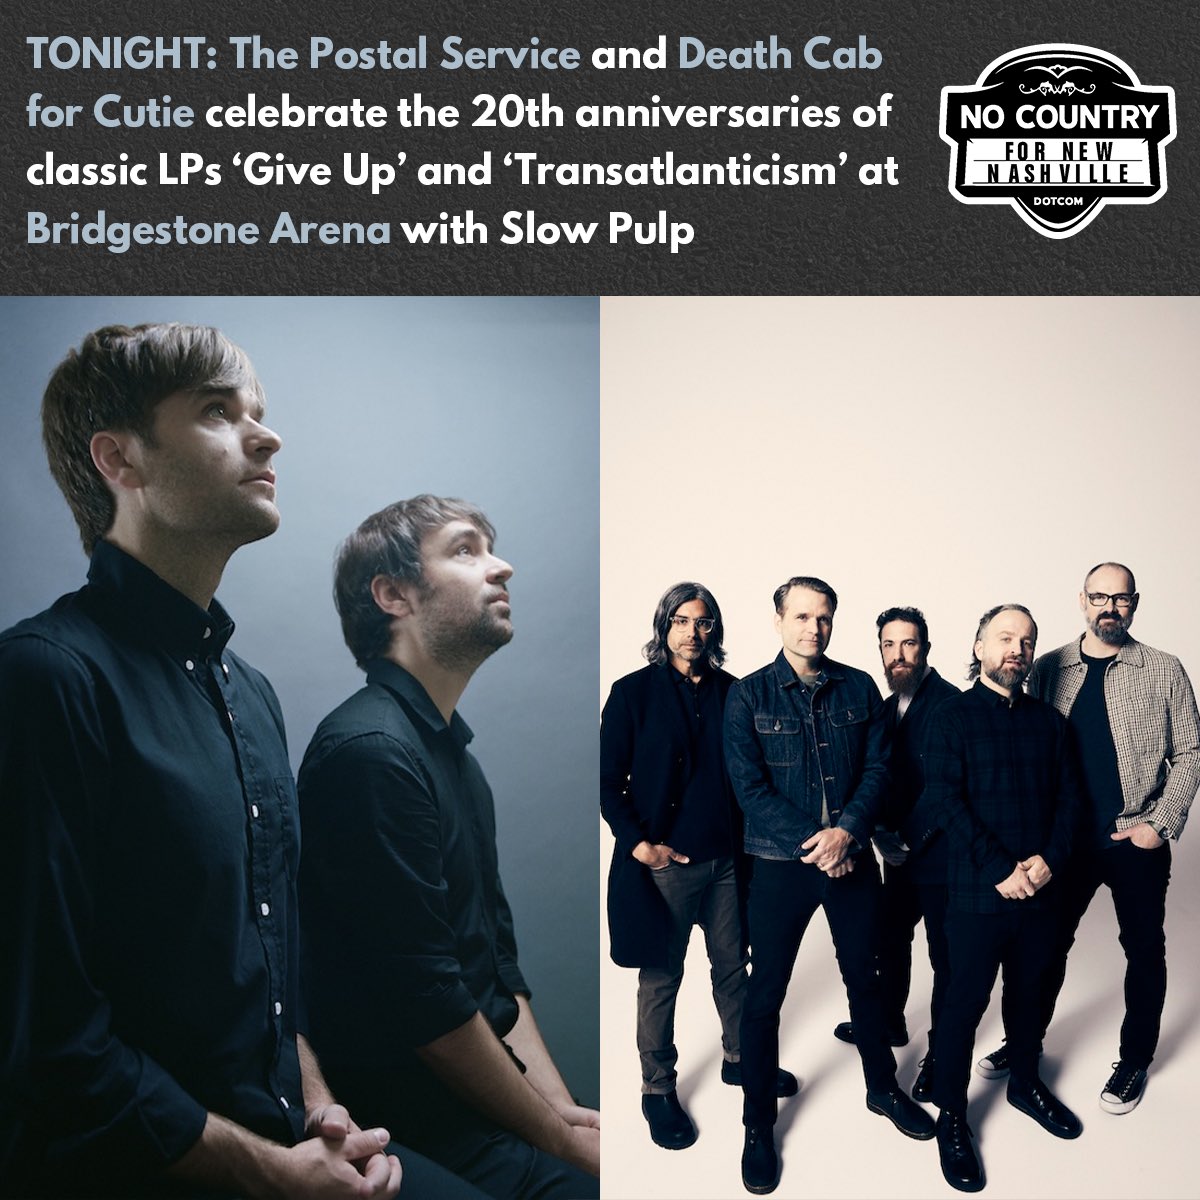 Iconic indie pop group @PostalService bring their reunion tour to @BrdgstoneArena TONIGHT, 4/29- their first Nashville show in 21 years- along @dcfc, both celebrating 20th anniversaries of landmark albums! @slowpulpband open & tickets remain! Learn more: nocountryfornewnashville.com/2024/04/29/the…